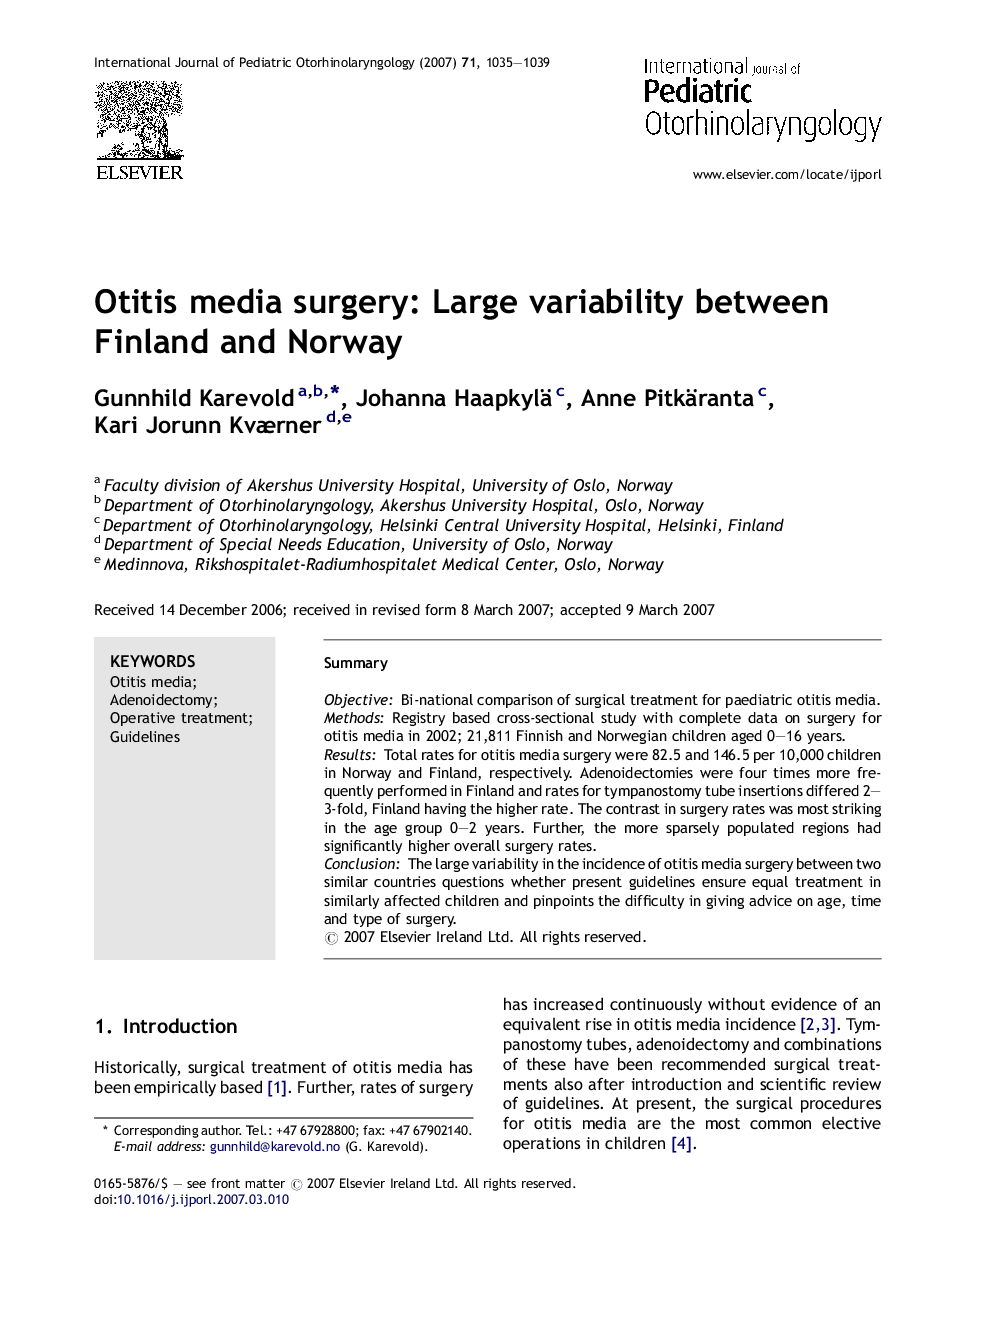 Otitis media surgery: Large variability between Finland and Norway